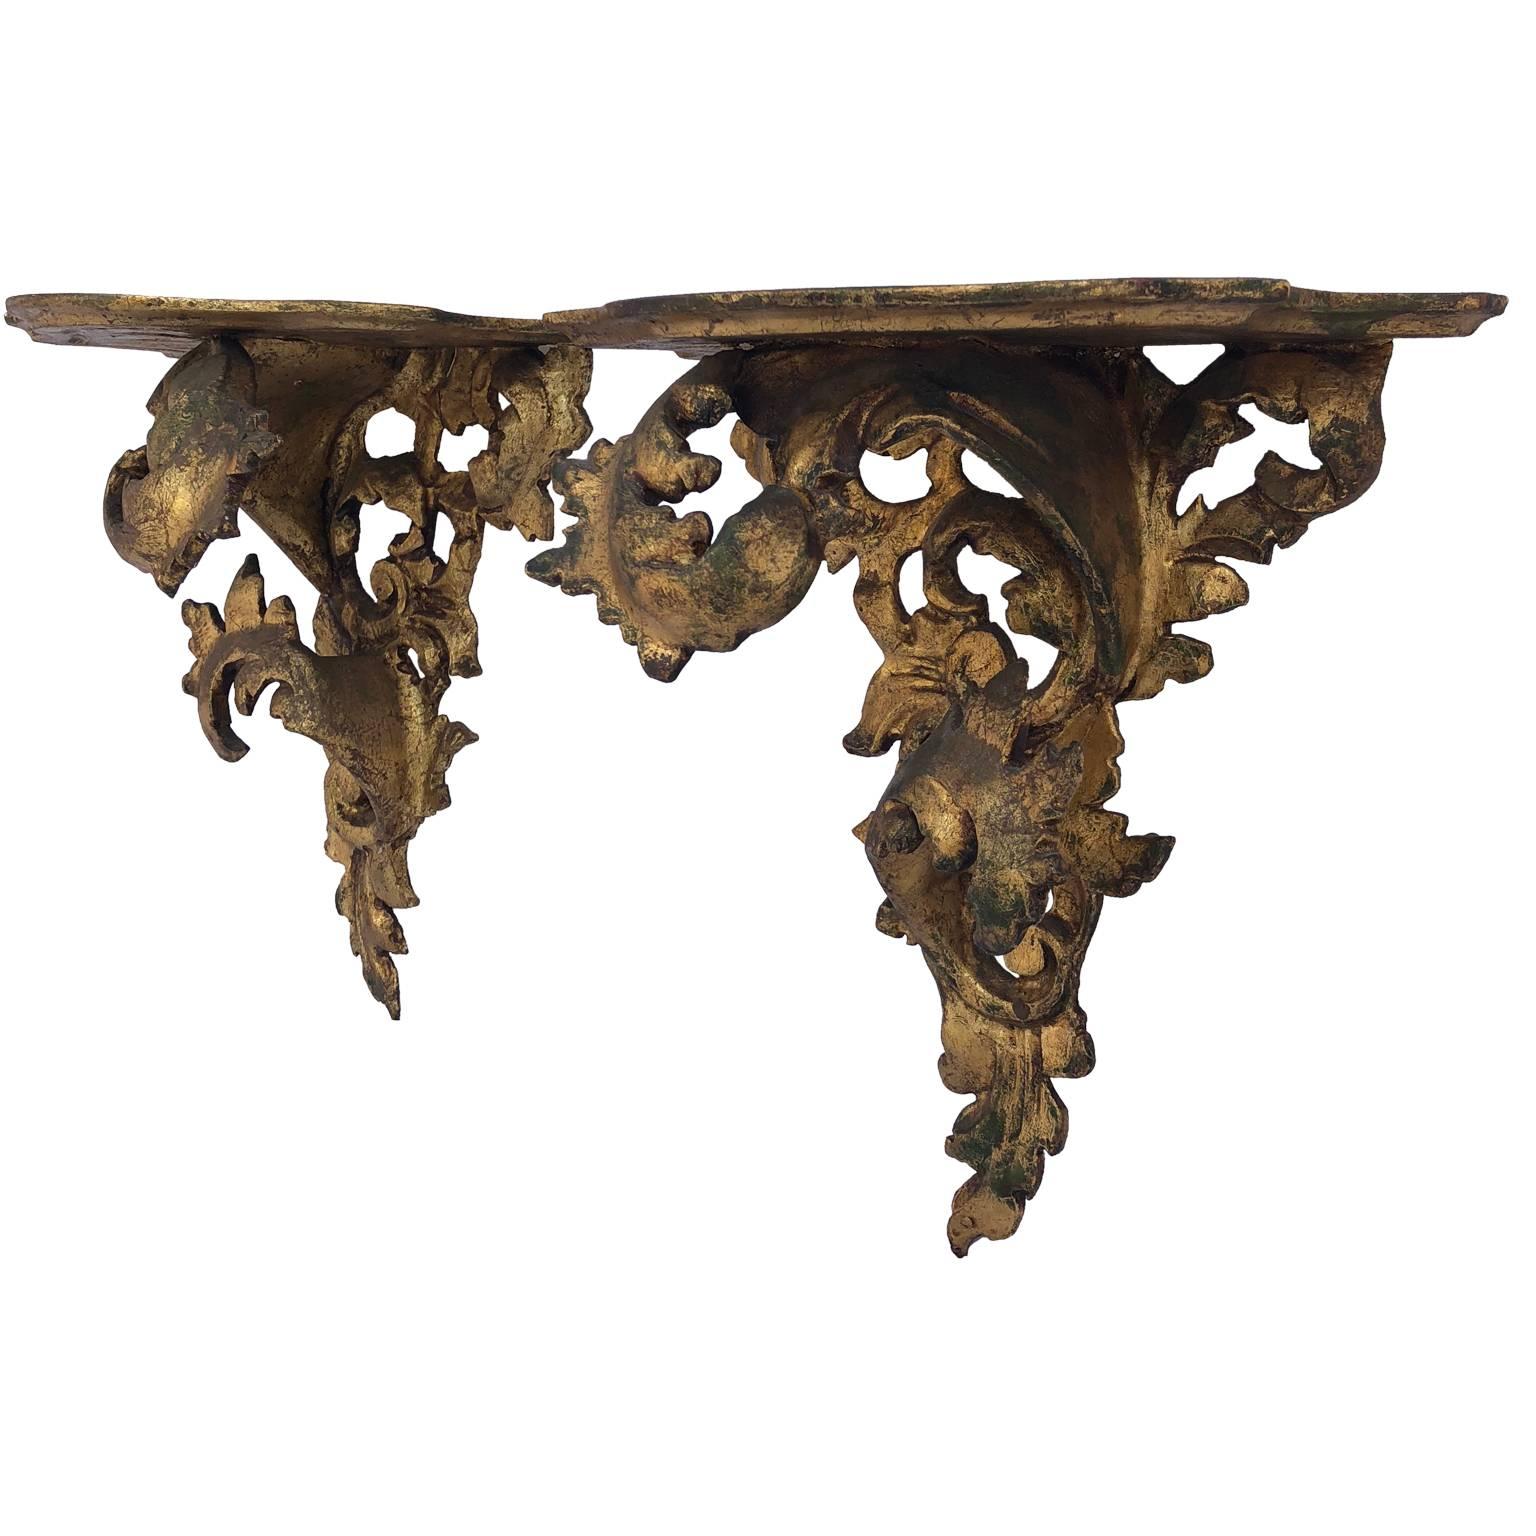 Hand-Crafted Pair of Italian Carved Wood Rococo Style Shelves or Brackets